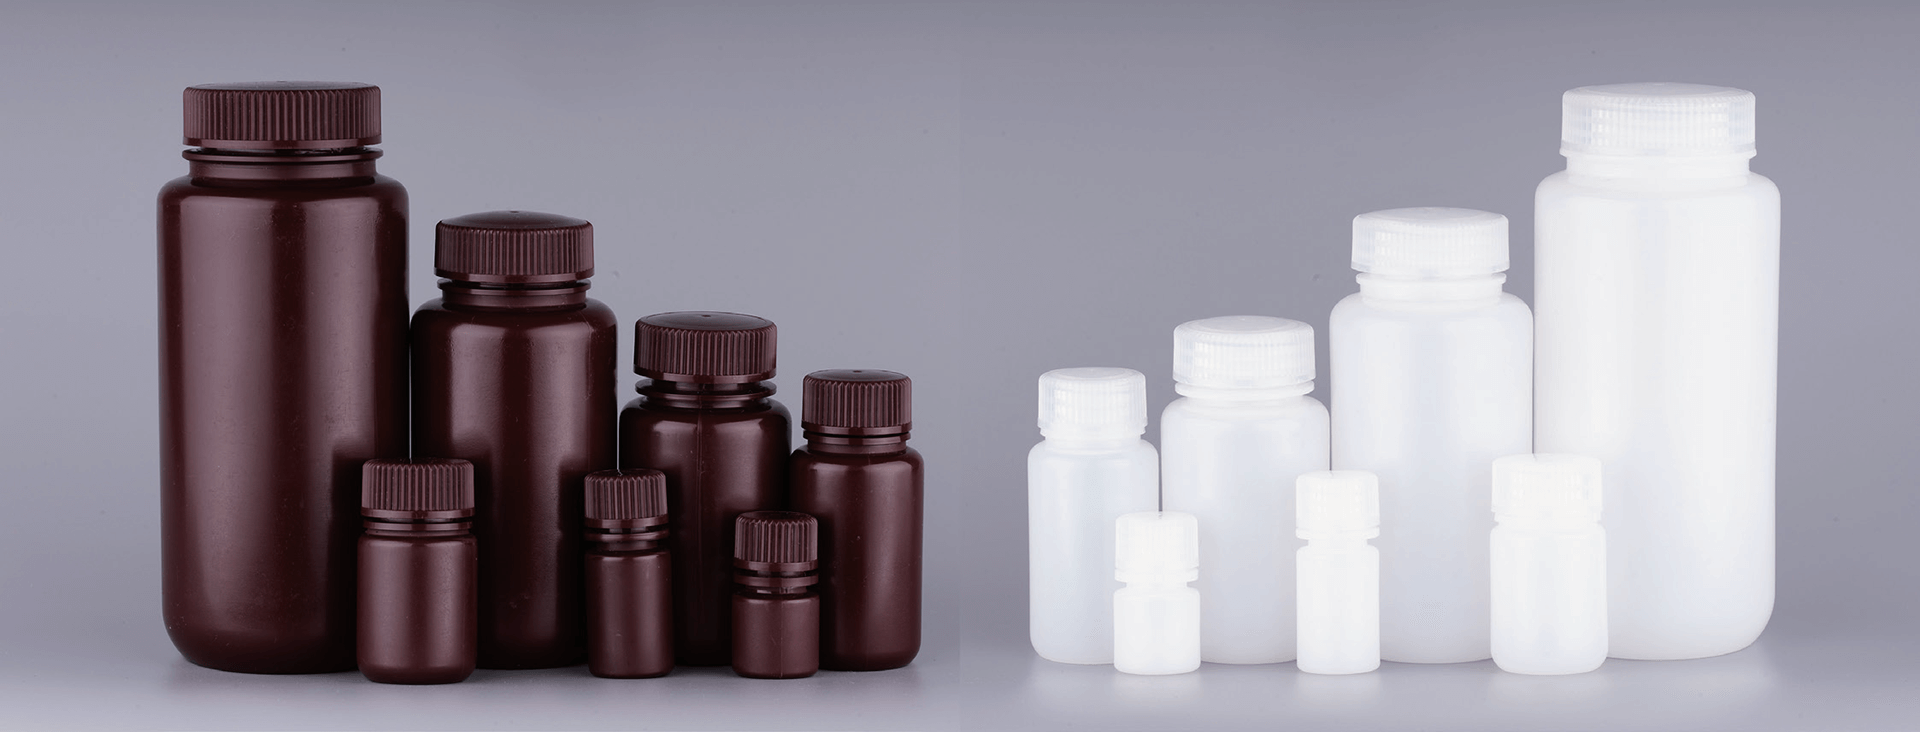 Suzhou Ace Biomedical's High Quality Plastic Reagent Bottles